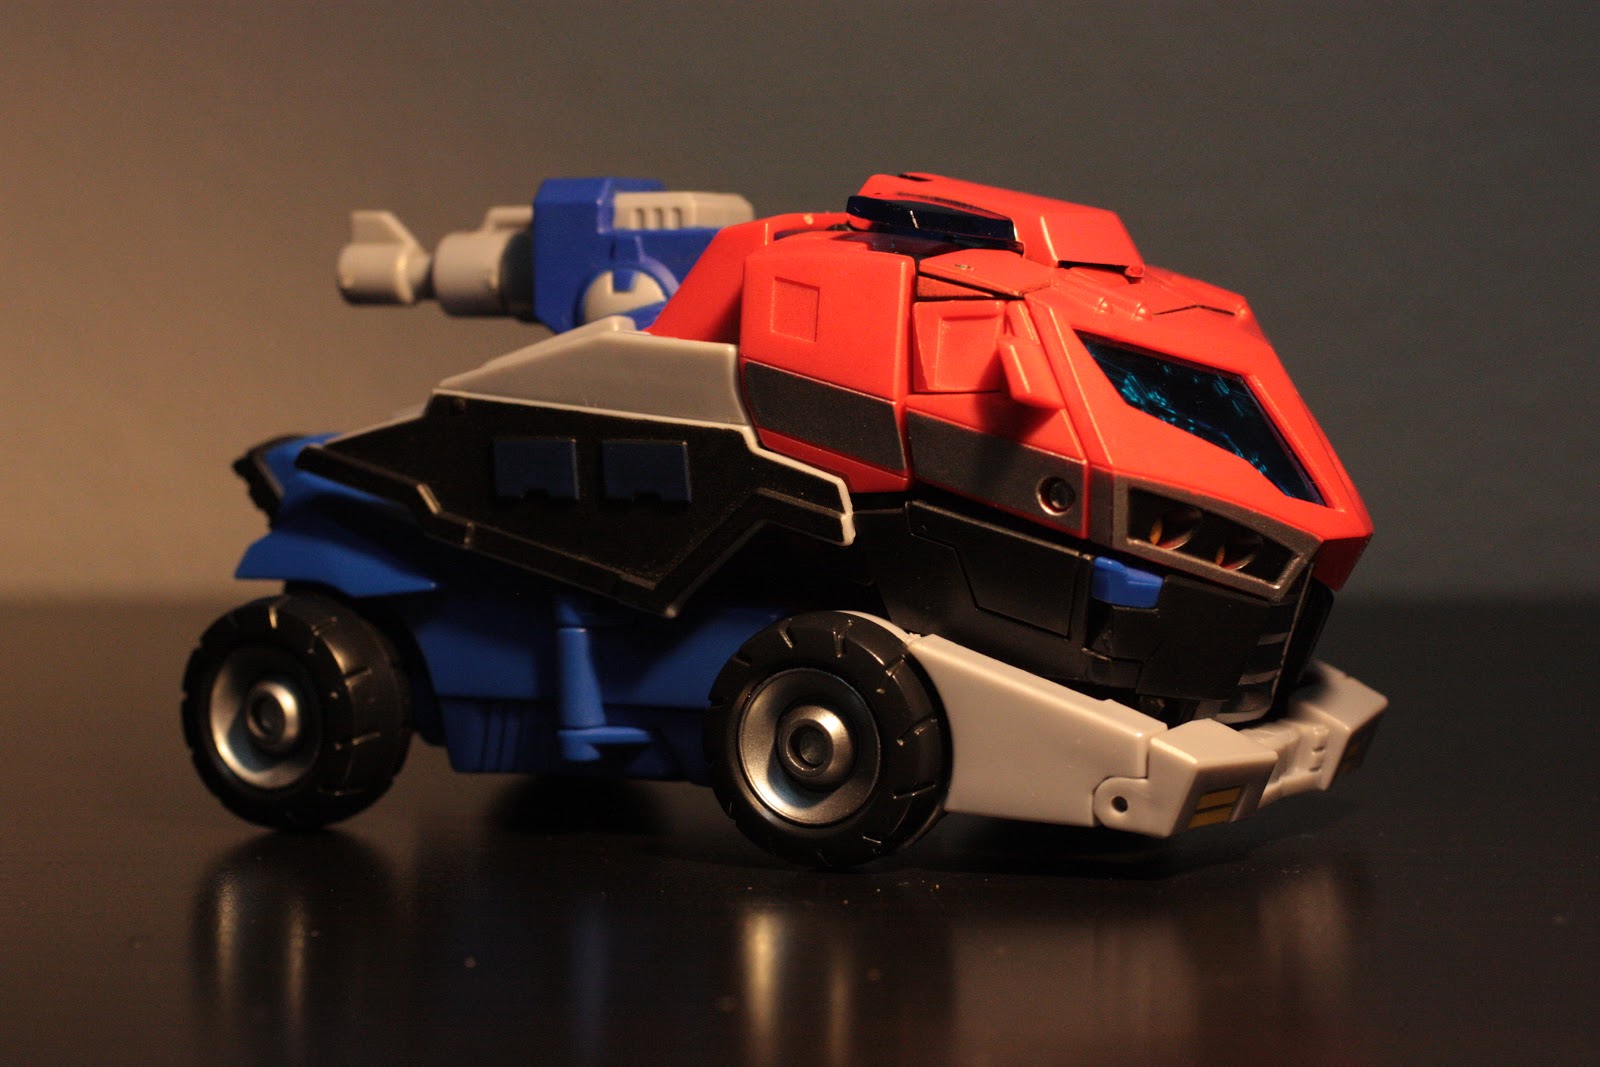 Firestarter's Blog: Toy Review: Transformers Animated Optimus Prime  (Voyager Class)